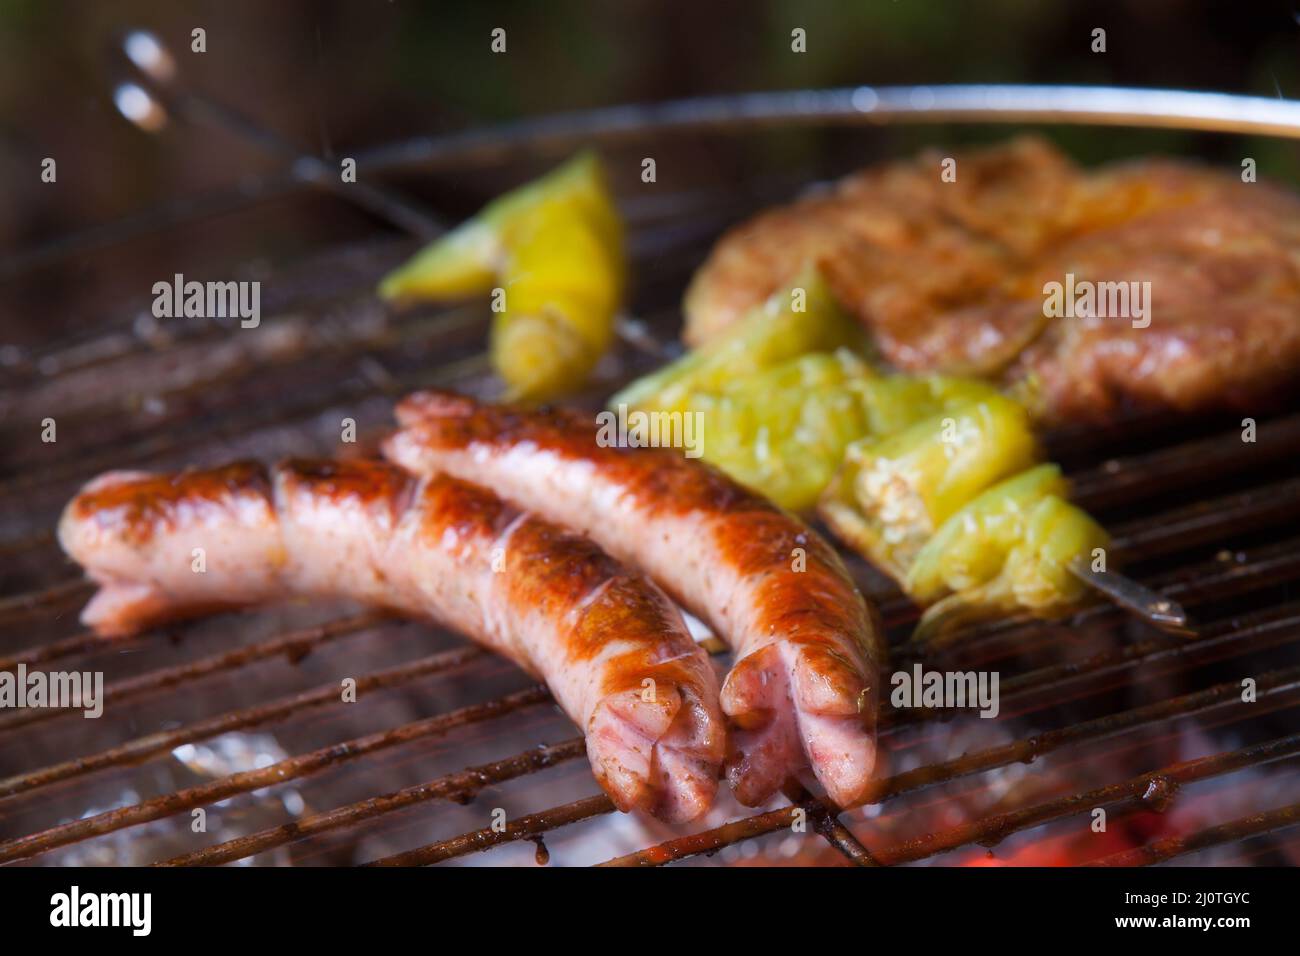 Grilled sausages on the grill Stock Photo